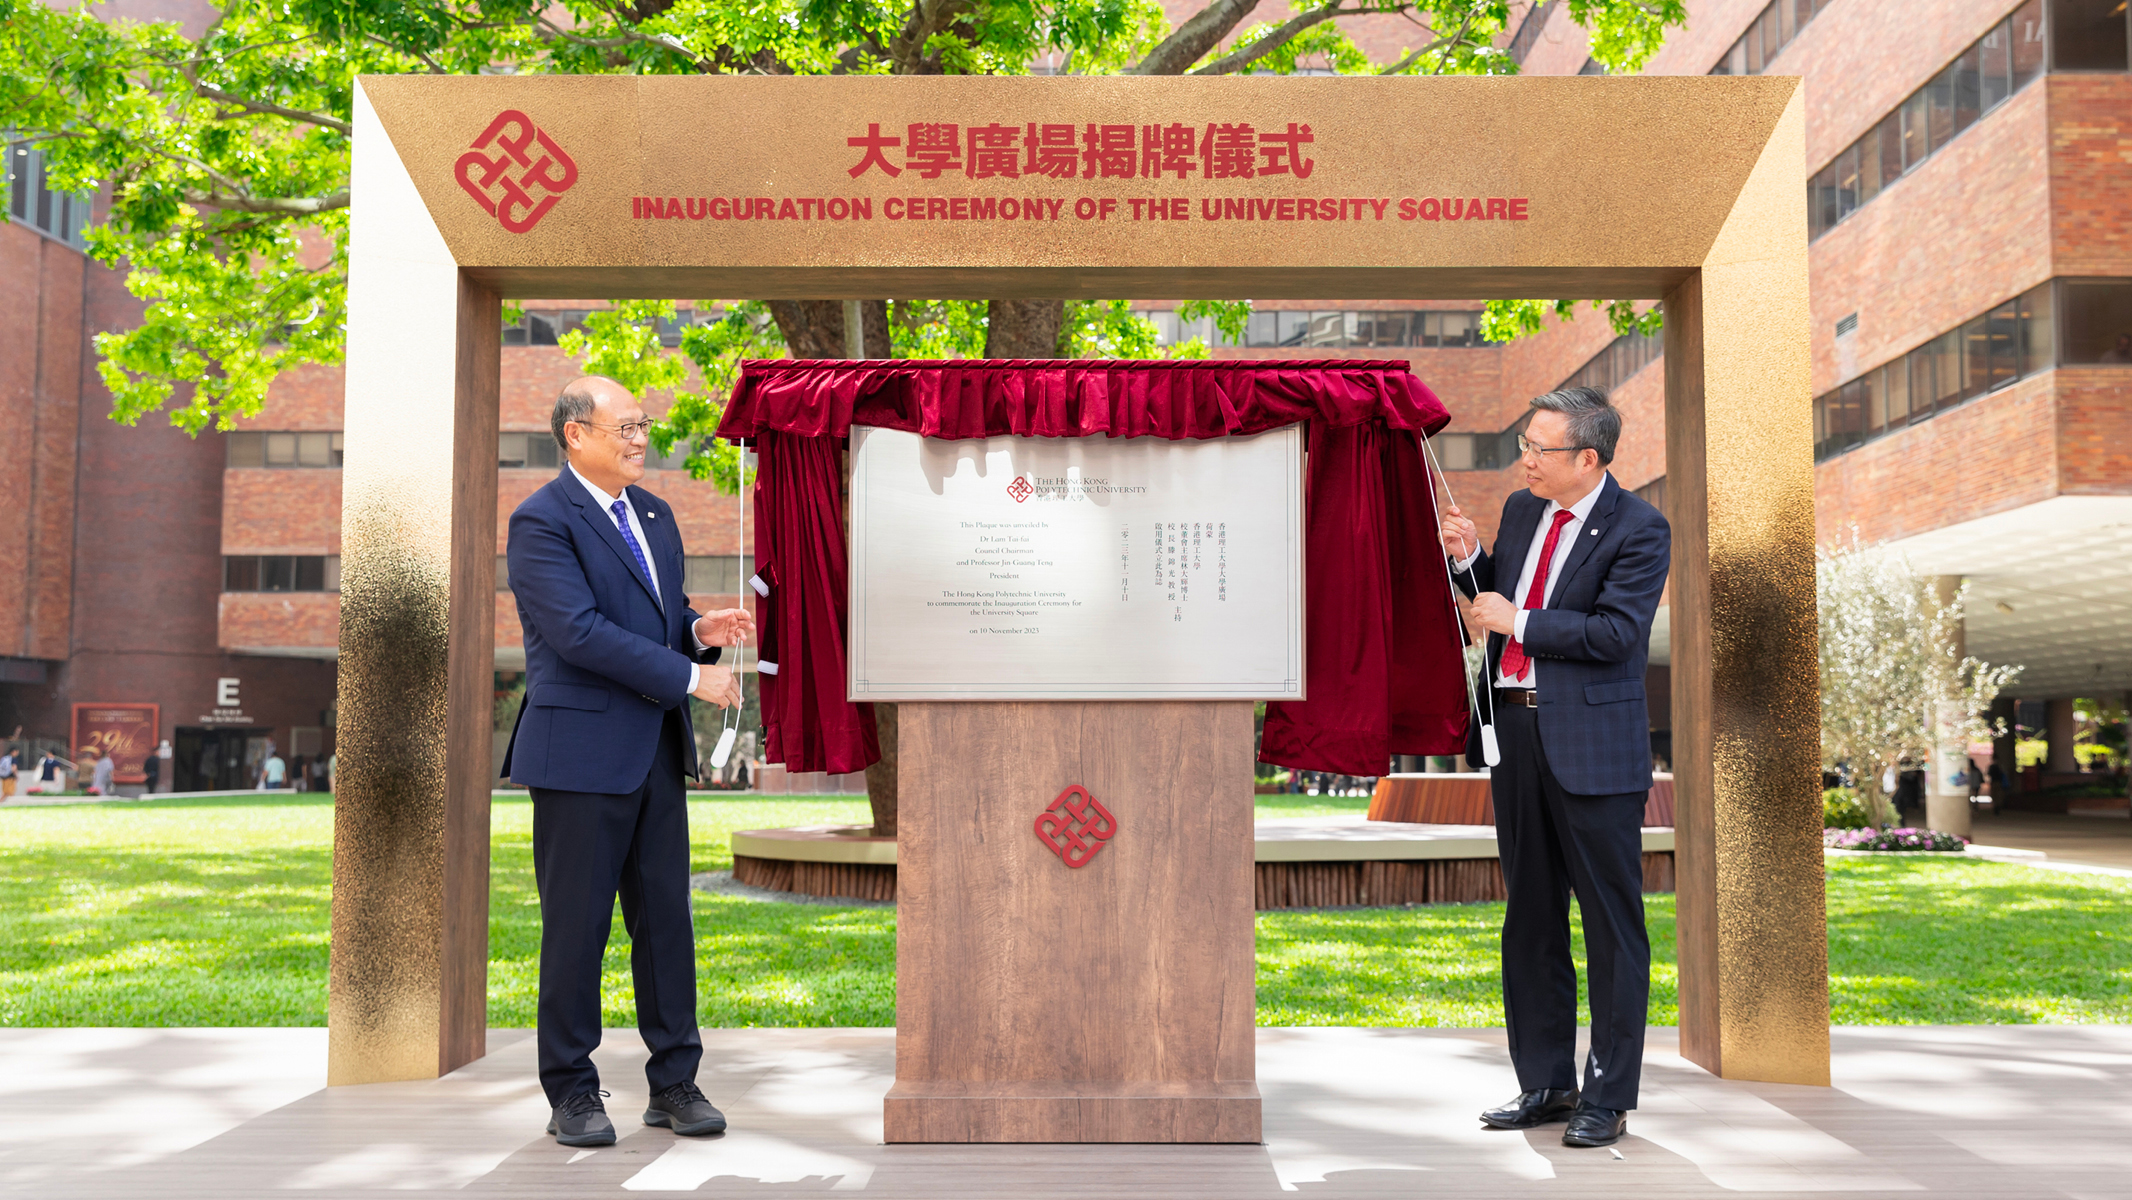 Dr Lam Tai-fai (left) and Professor Jin-Guang Teng officiated the Inauguration Ceremony of the University Square. 43